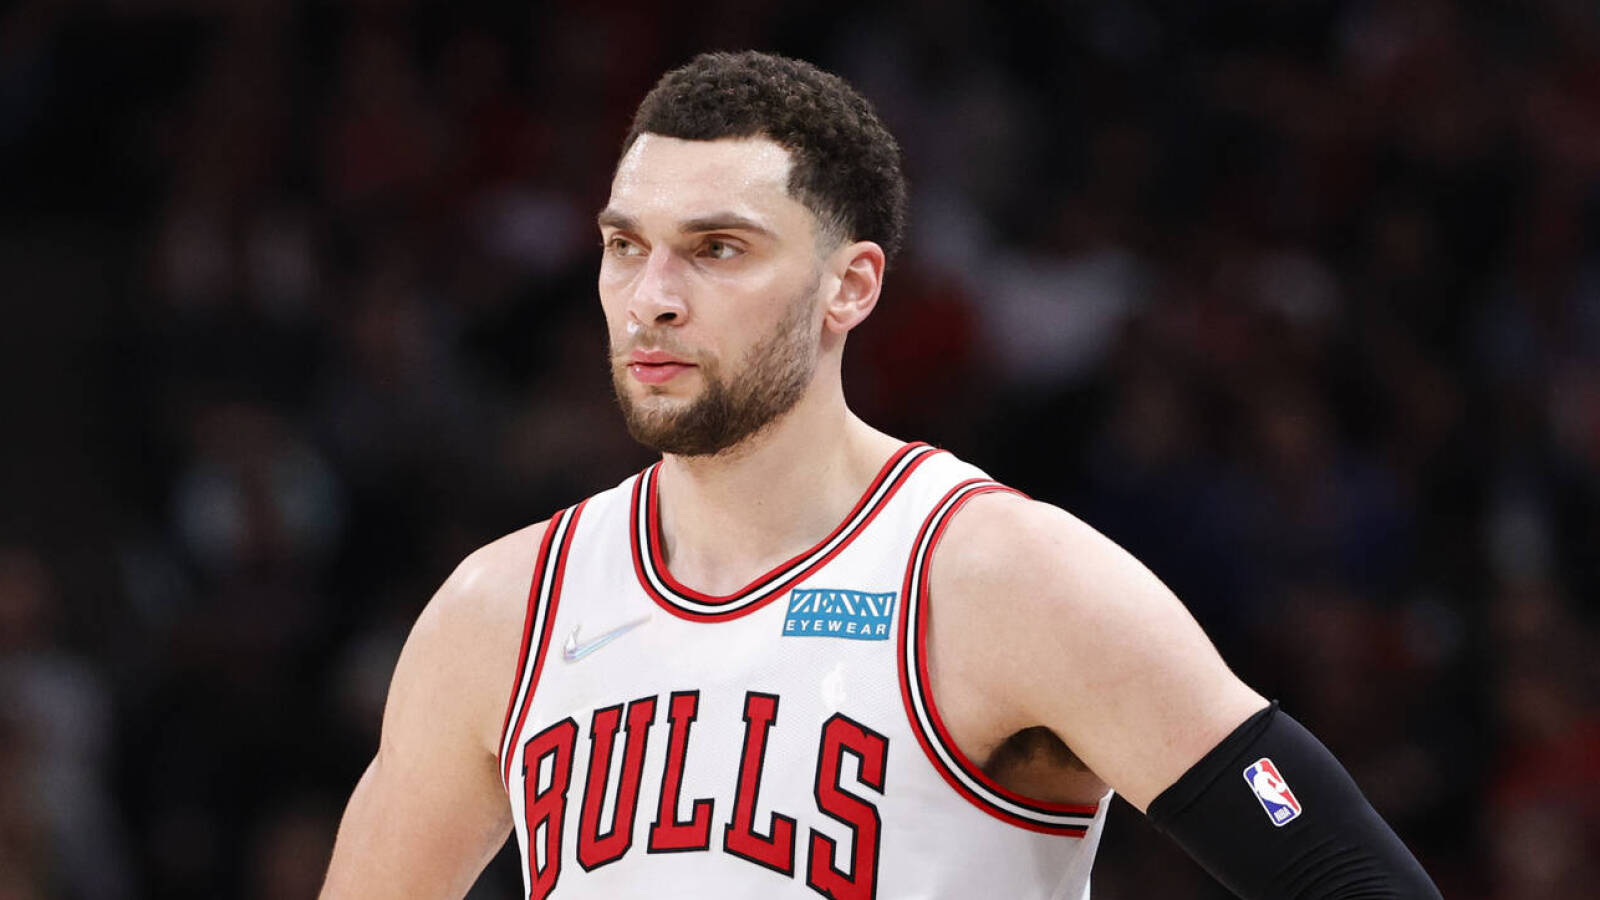 Maxed out? Hardly. Bulls star Zach LaVine up for new challenges